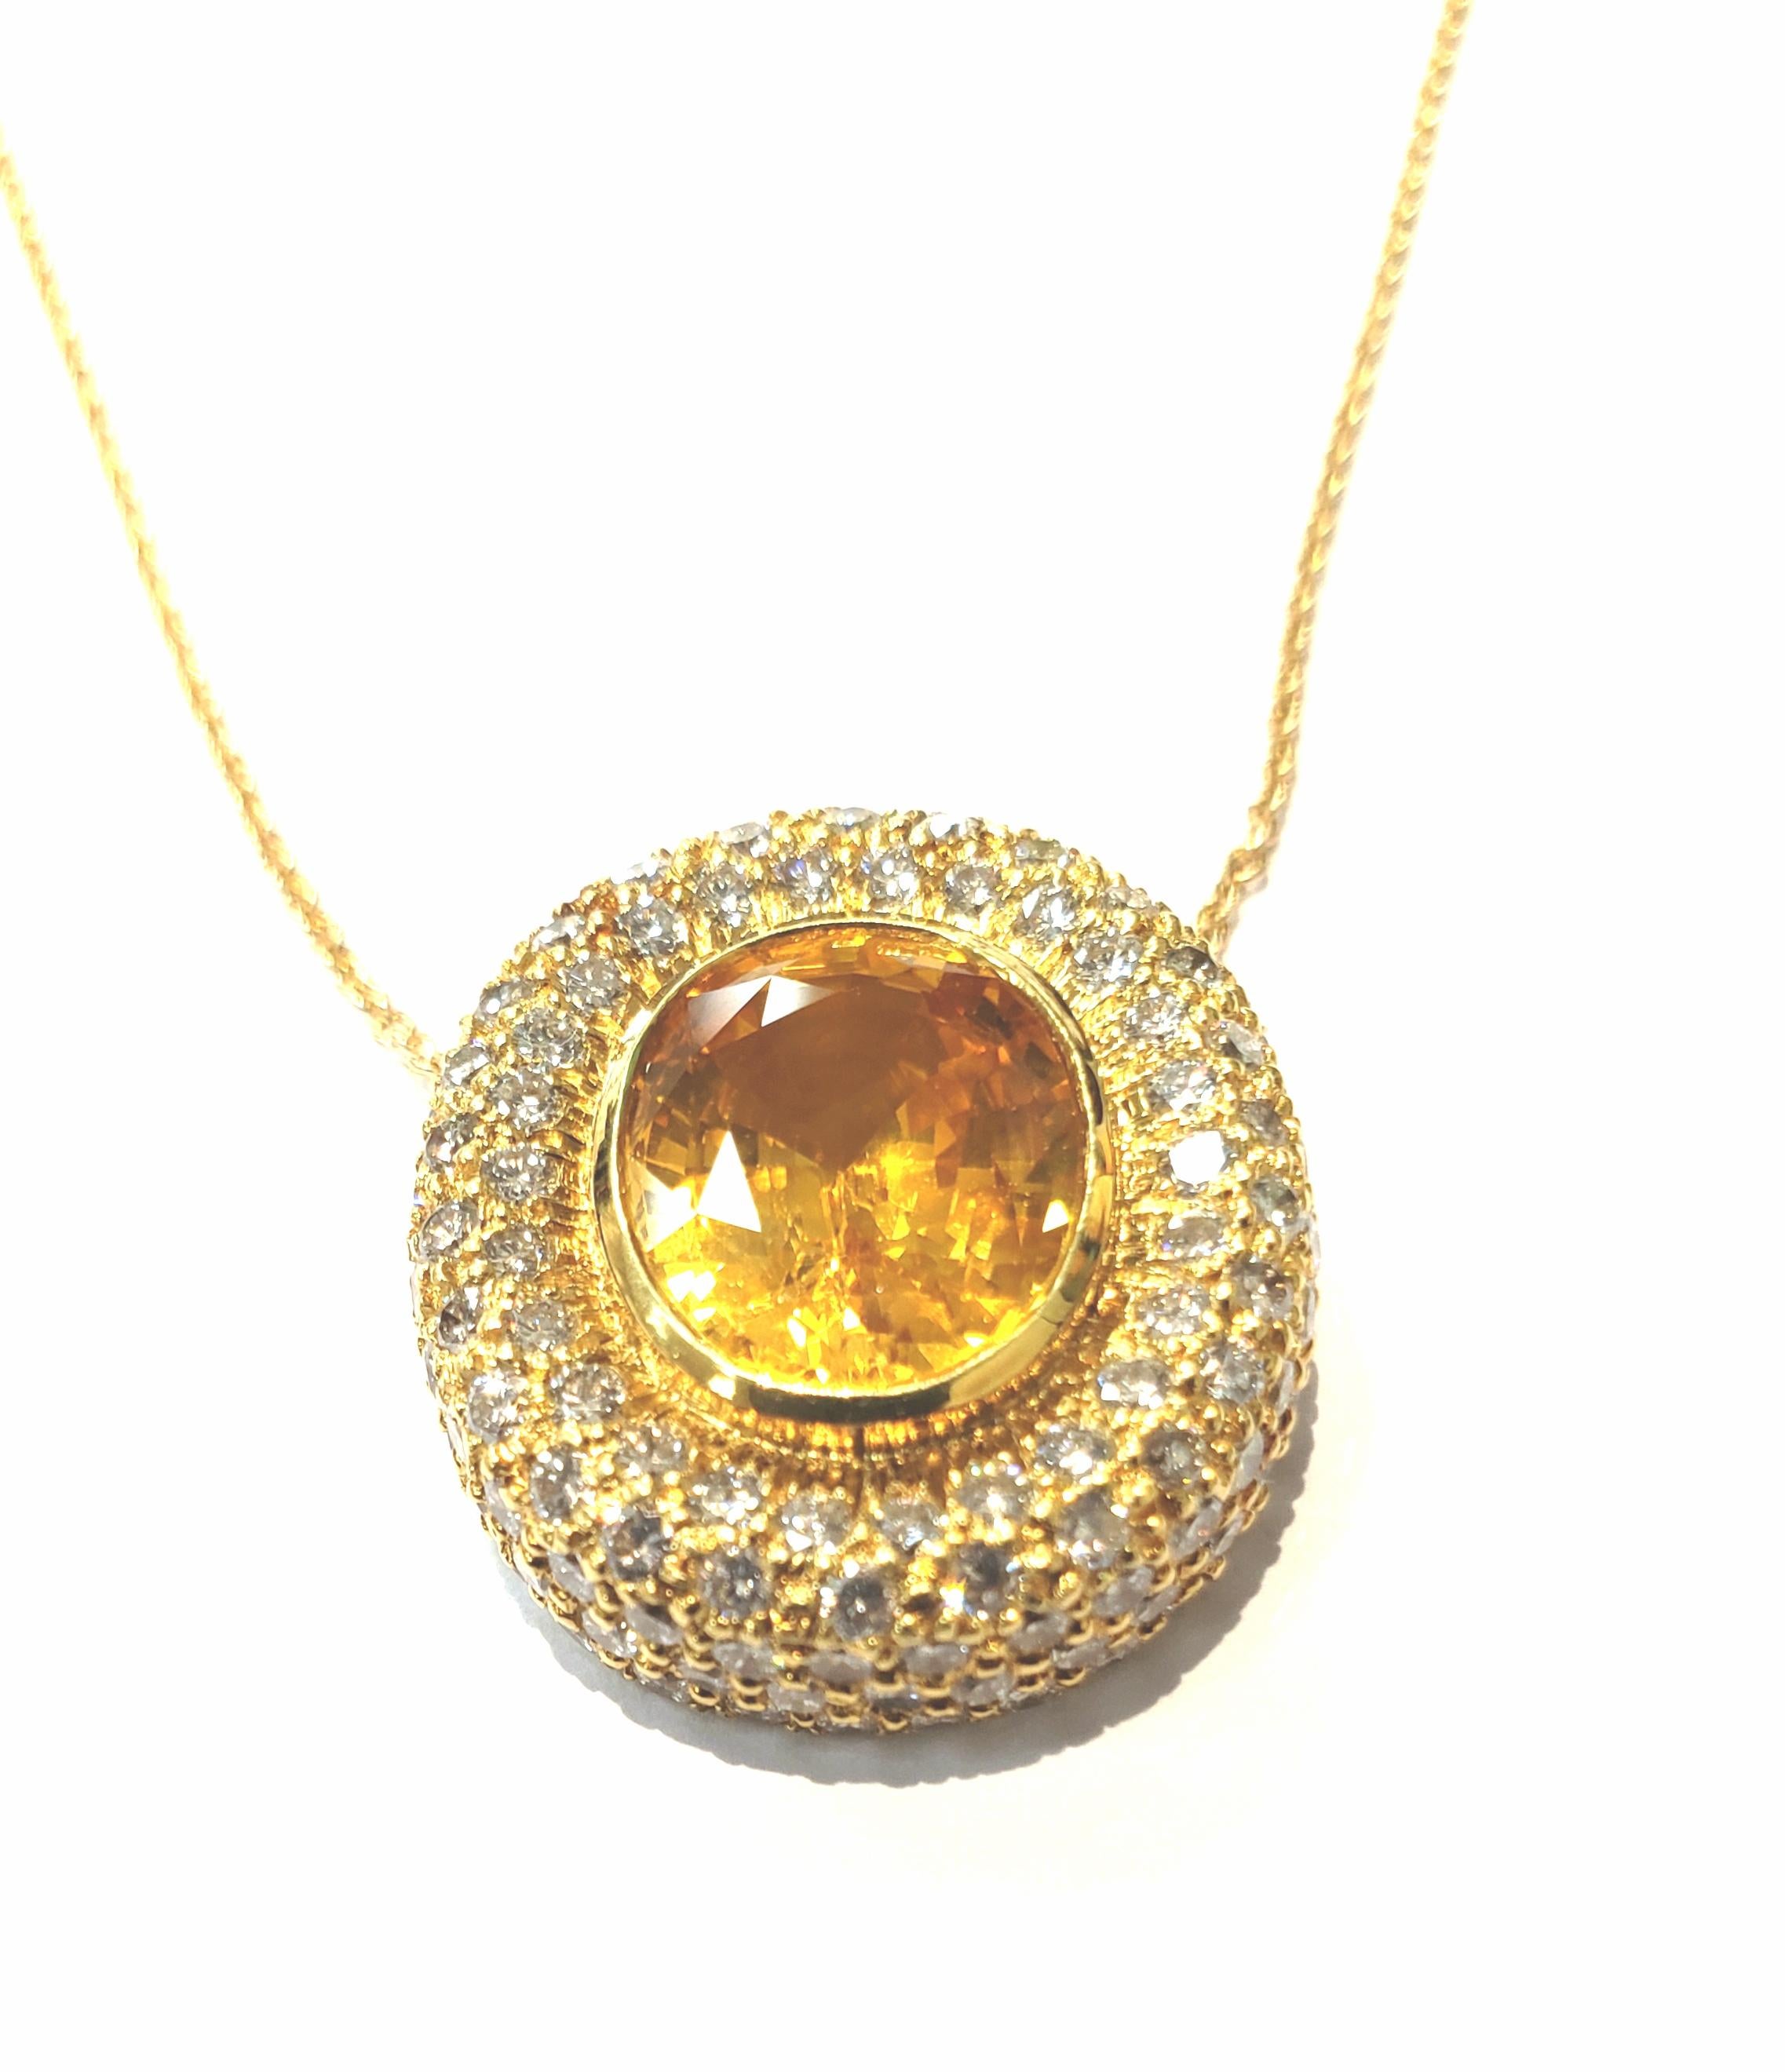 Oval Cut Handmade 18 Karat Yellow Gold and Diamond Pendant with a Center Yellow Sapphire For Sale